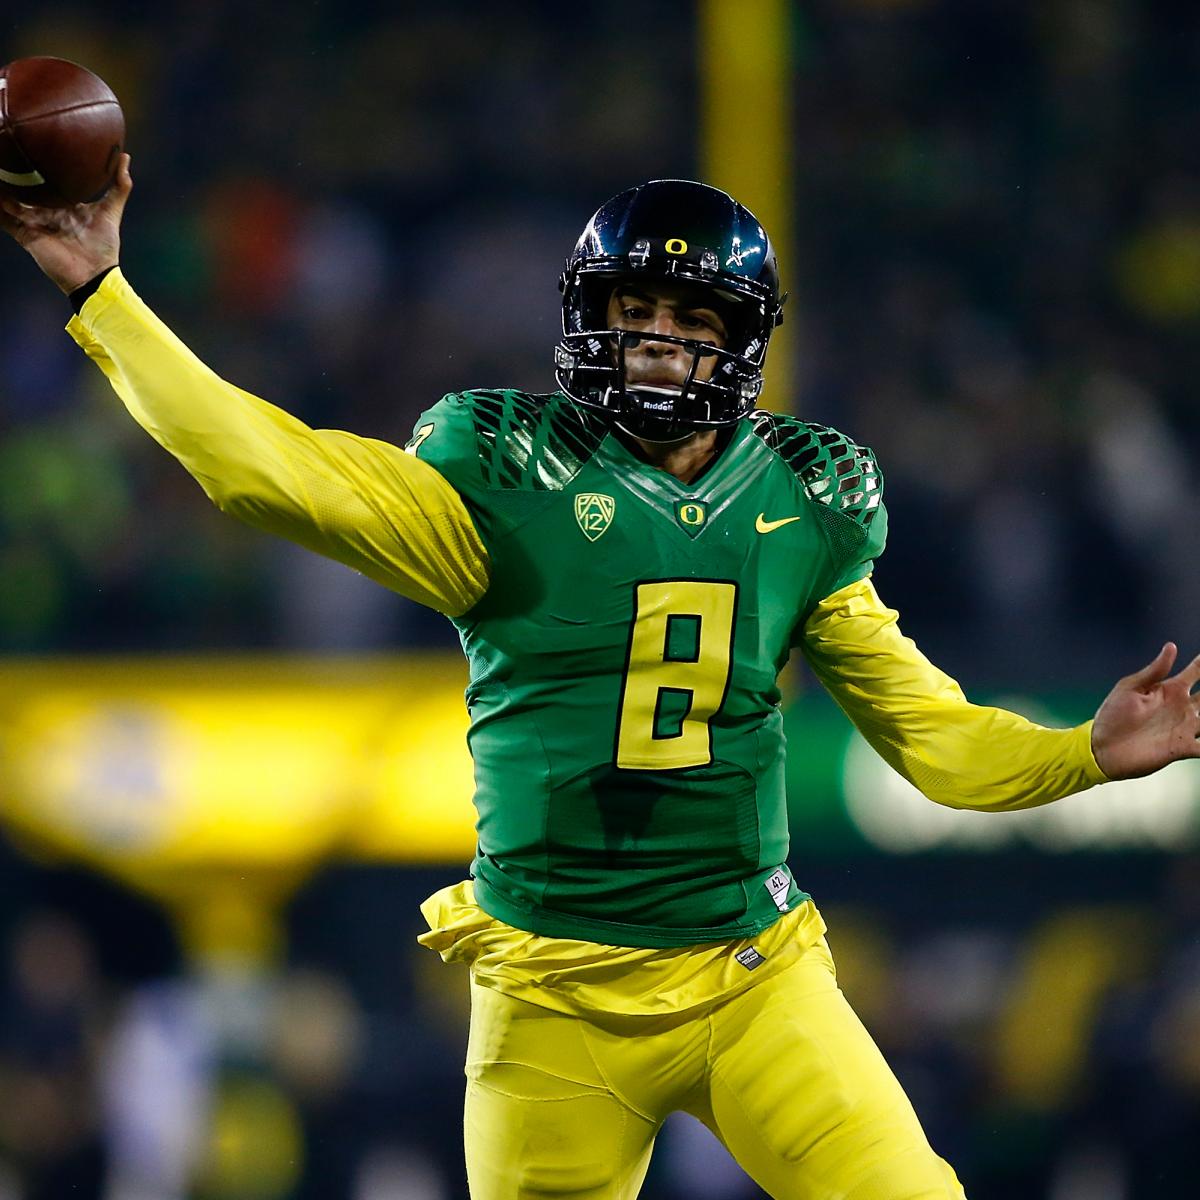 Ranking the Top 5 Oregon Football Players of All Time News, Scores